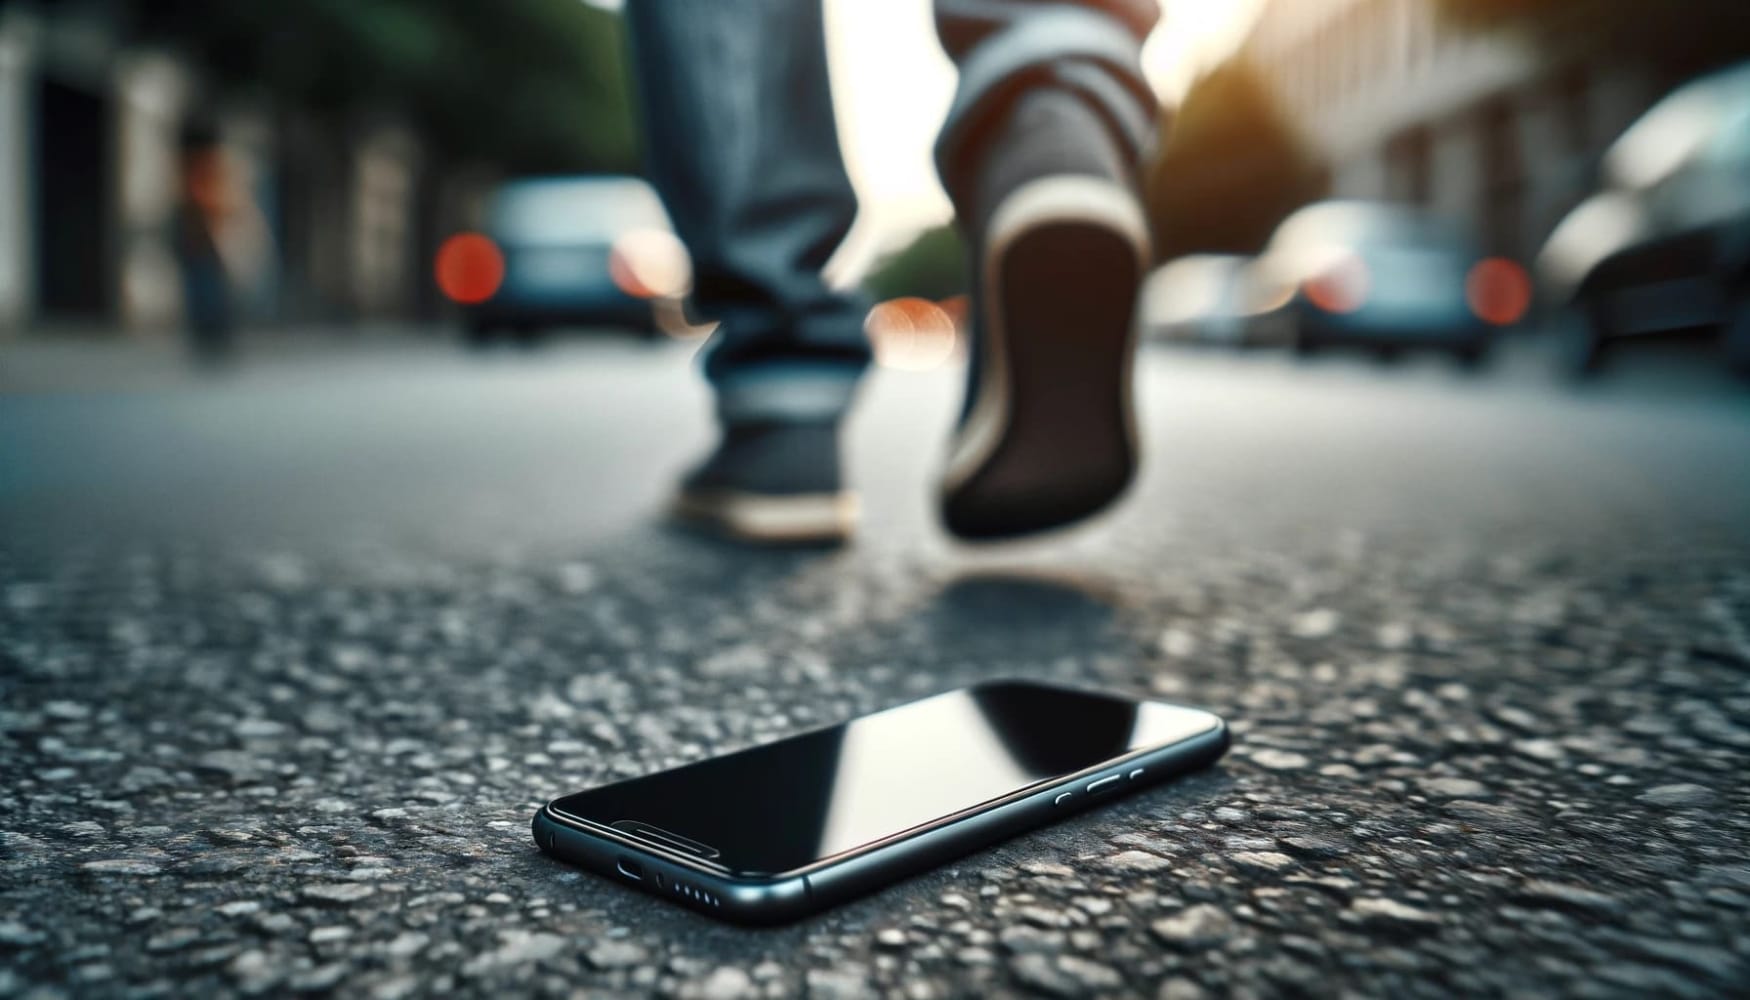 An image showing a close-up of a lost phone lying on asphalt. In the background, partially out of focus, is a human foot and leg, indicating that the person is walking away from the phone. The human leg in the scene, walking away, suggests a moment of loss or oversight, where the person has unknowingly dropped their phone. The scene convey a sense of departure, with the phone's solitary position on the asphalt underlining the theme of disconnection and absence.